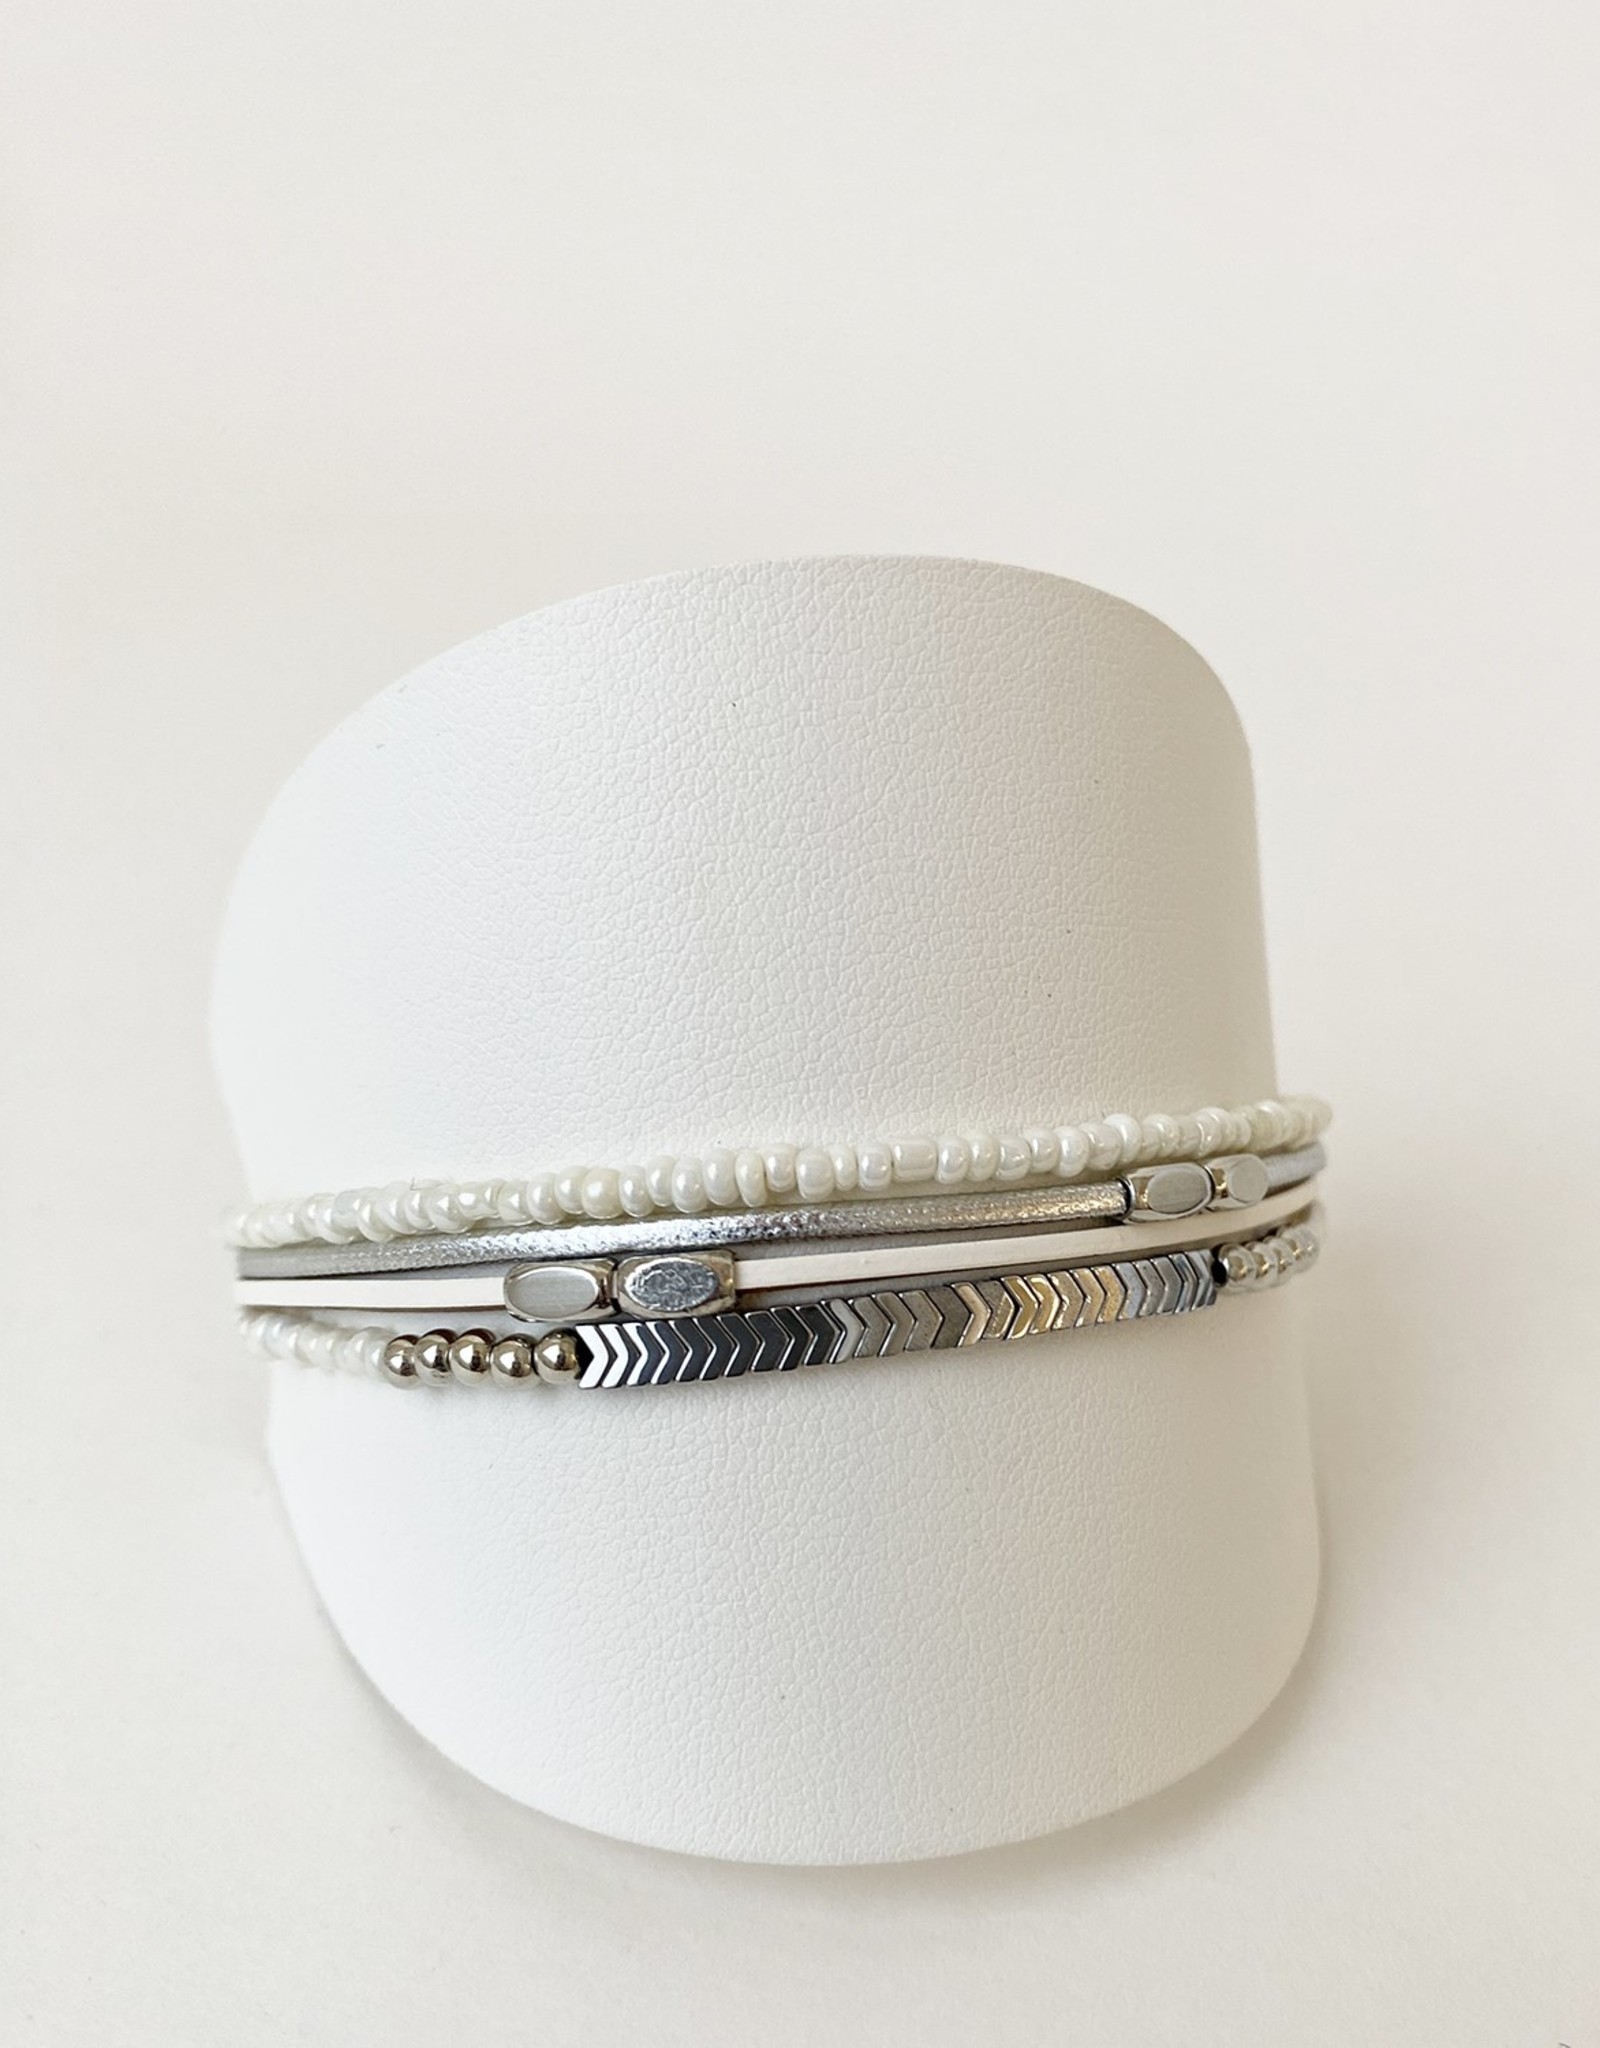 White, Silver & Gold Multi Strand Bracelet with Metal Beads